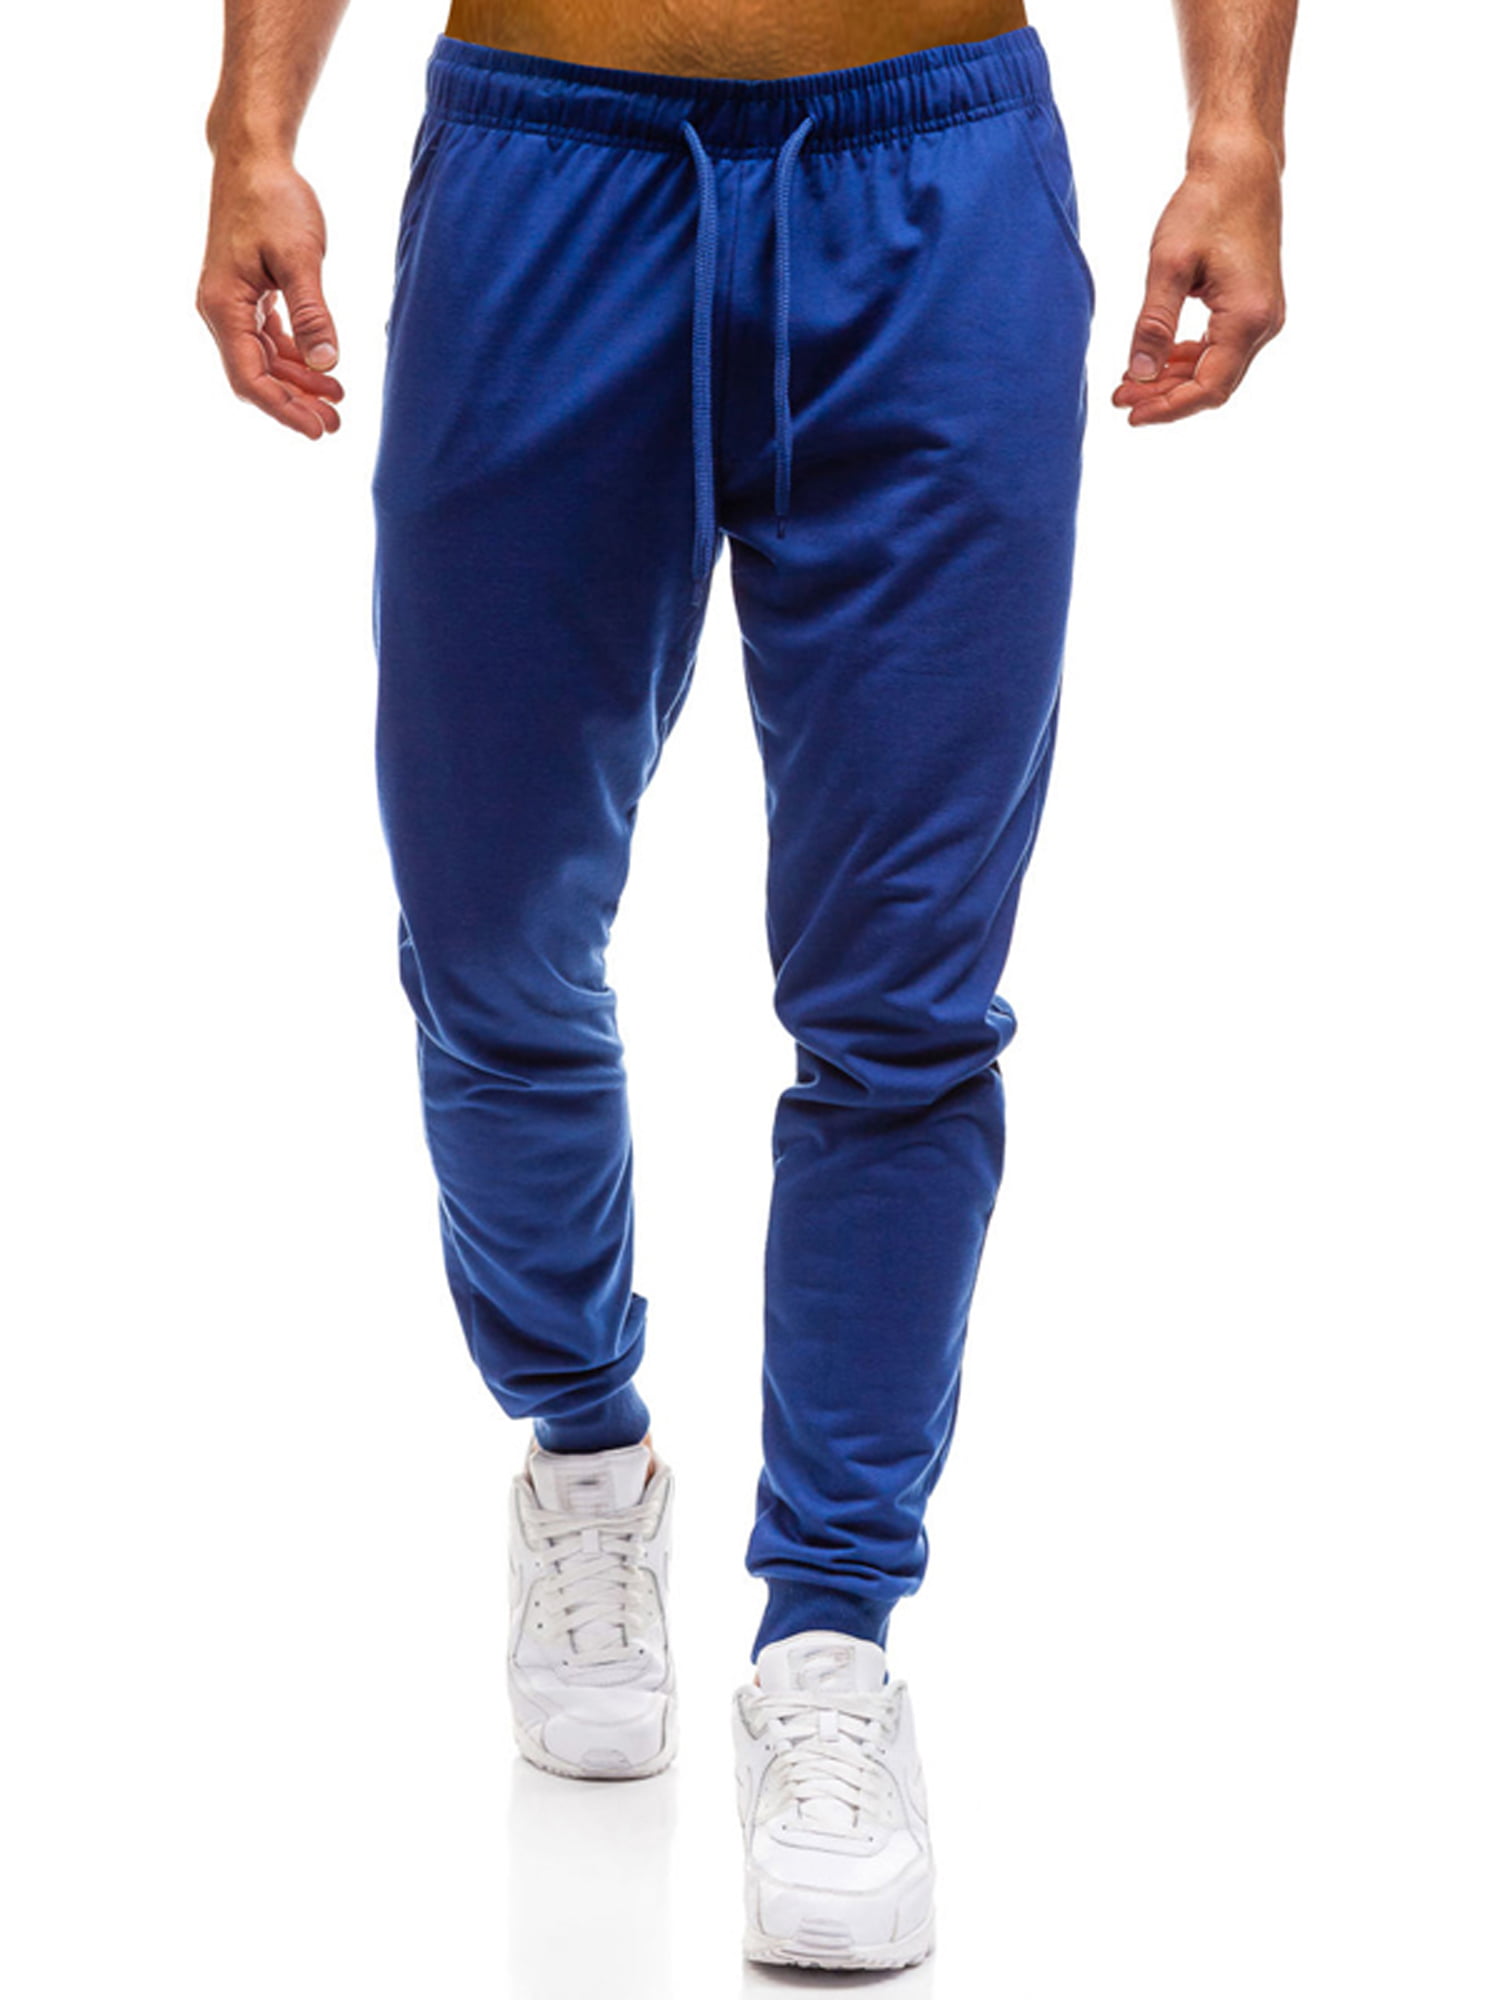 Wodstyle - Men's Fit Training Casual Jogging Gym Bottom Sports ...